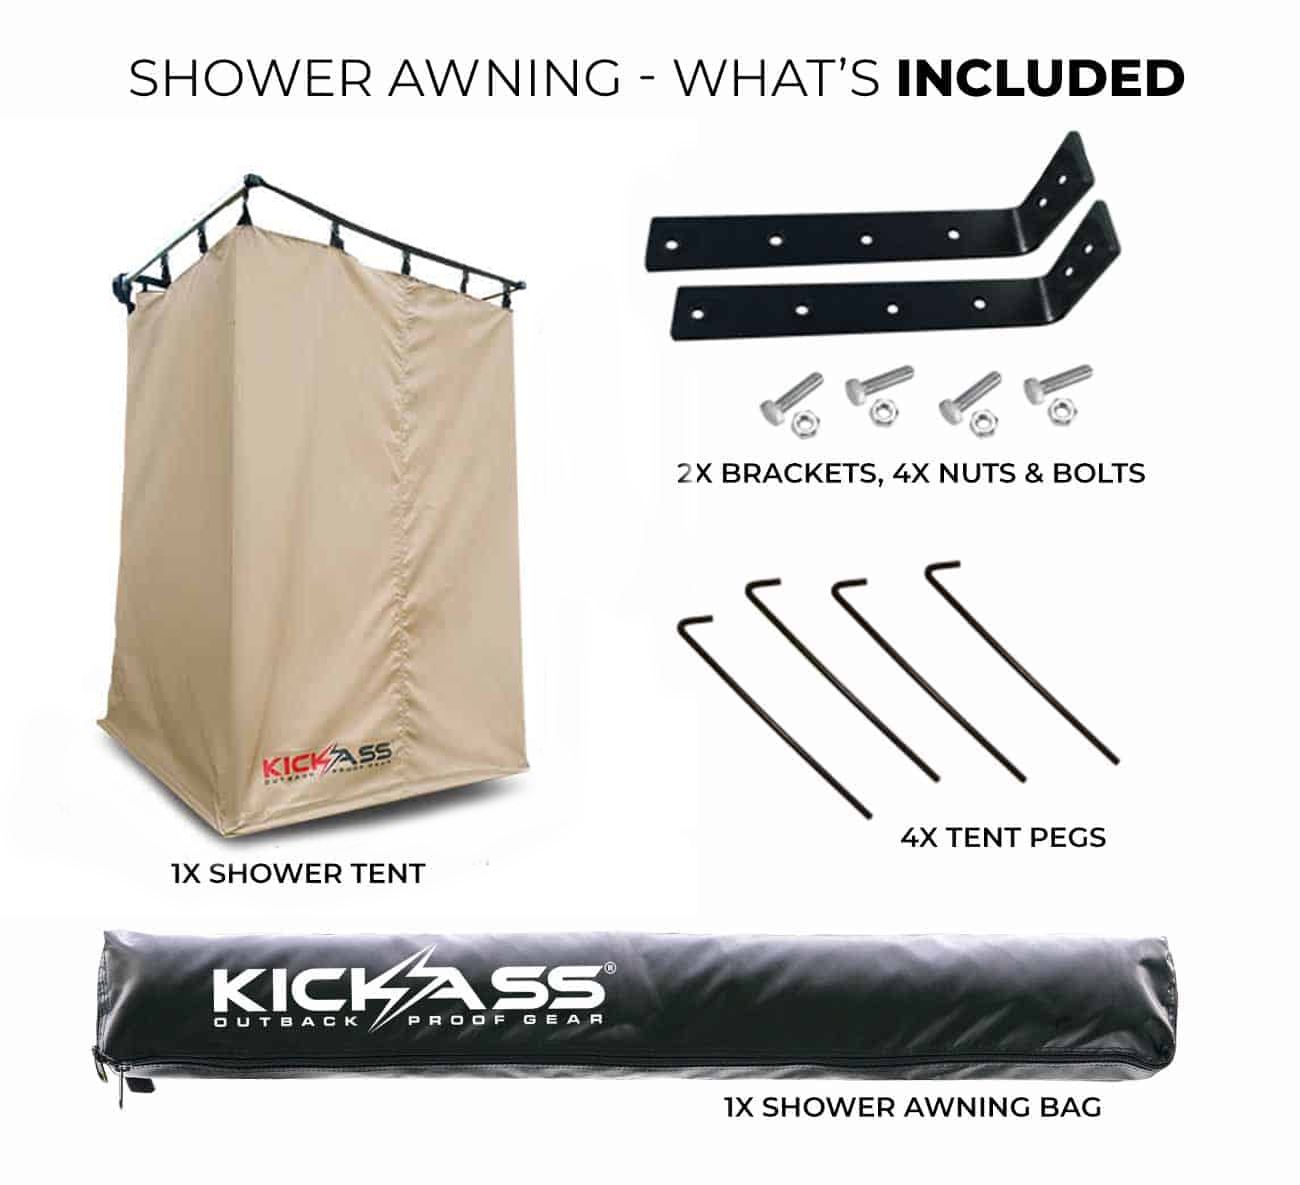 Shower awning - What's included